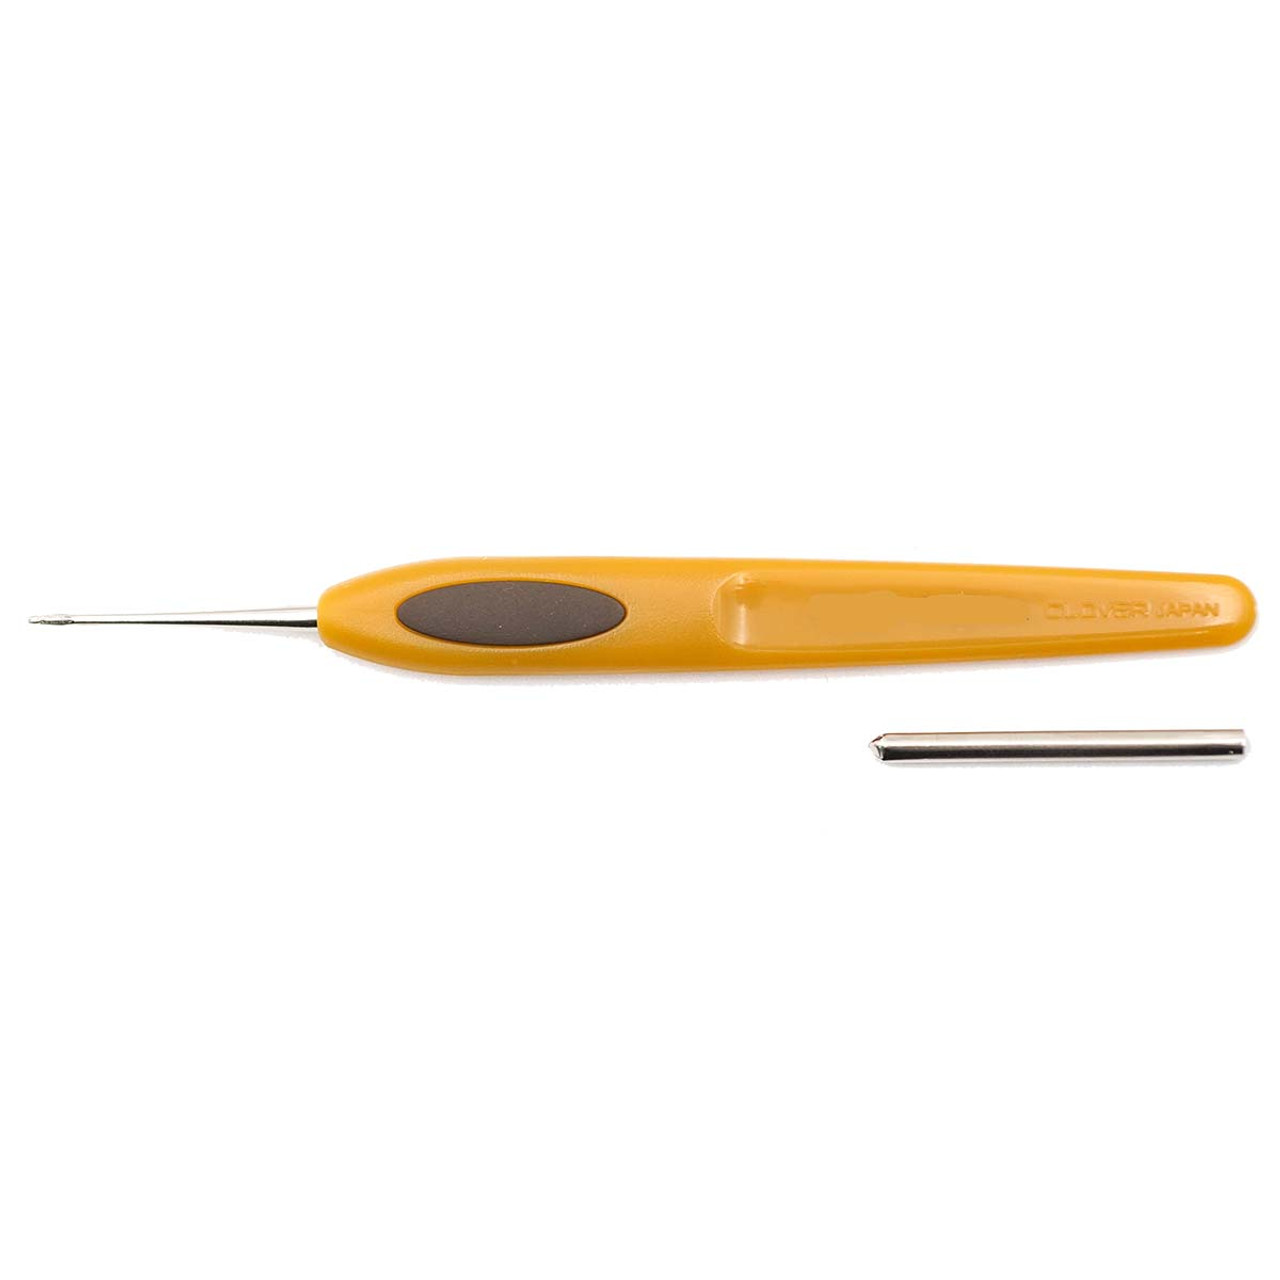 Clover Crochet Hook Soft Touch All Sizes 0,5 to 6 Mm, Special